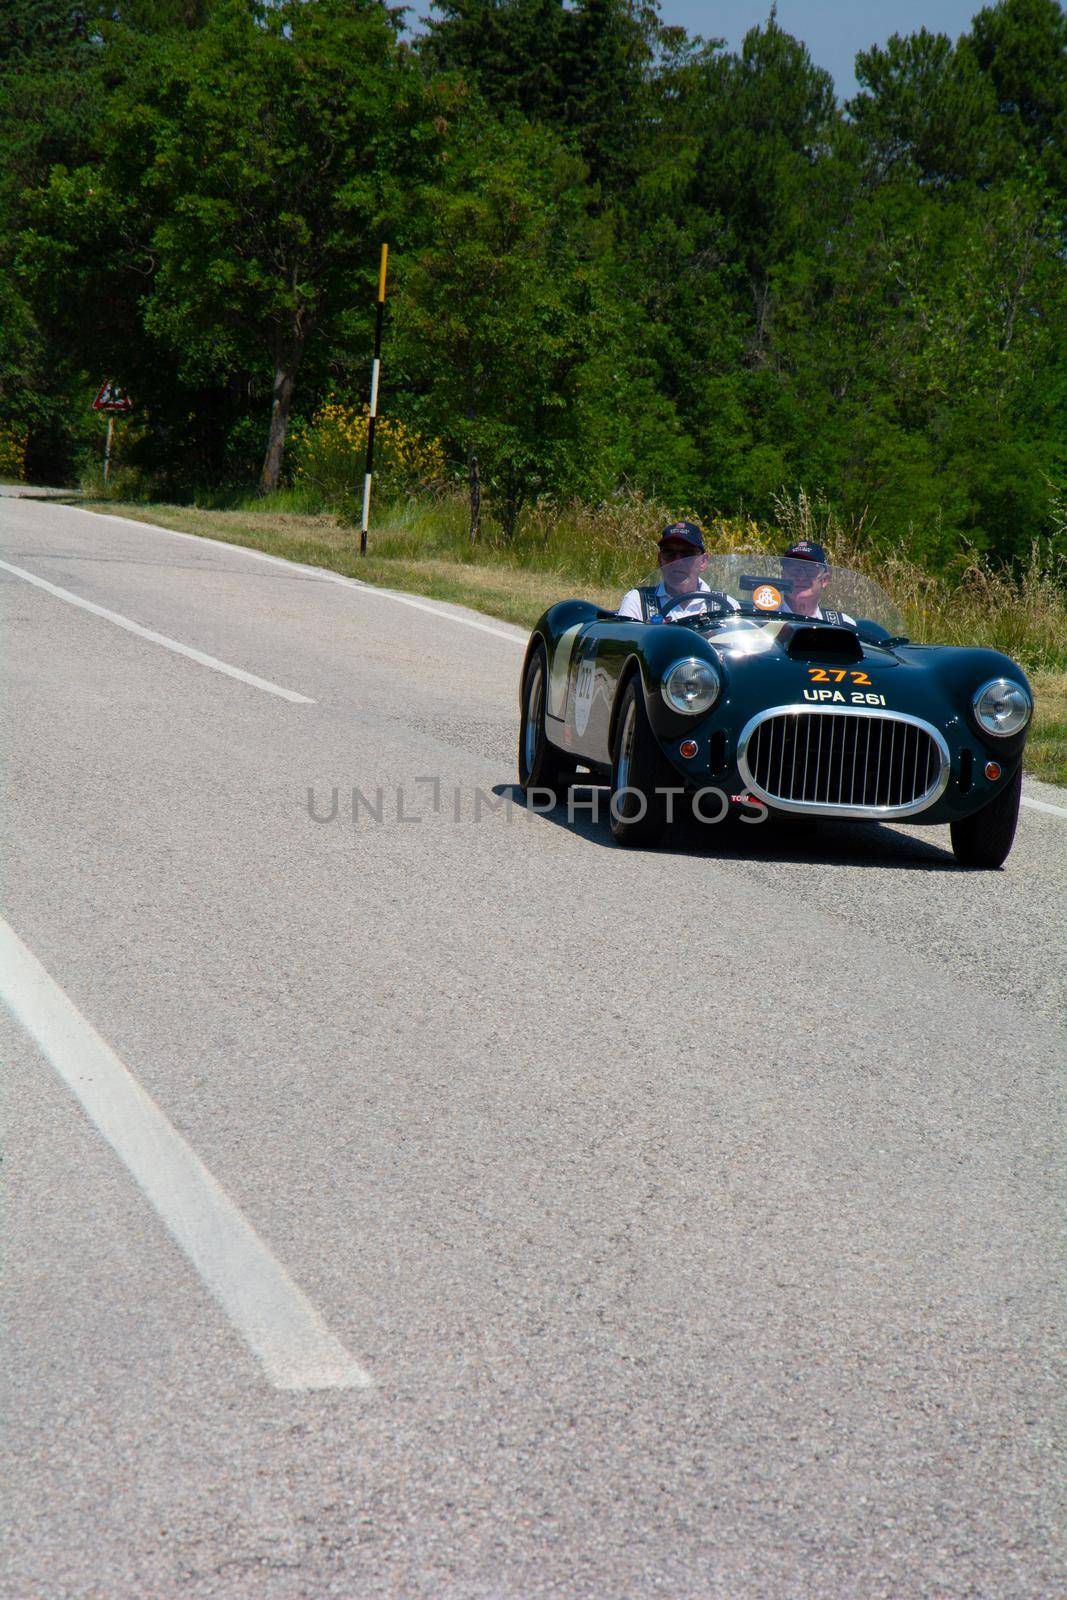 COOPER BRISTOL T25 BRISTOL 1953 on an old racing car in rally Mille Miglia 2022 the famous italian historical race (1927-1957 by massimocampanari